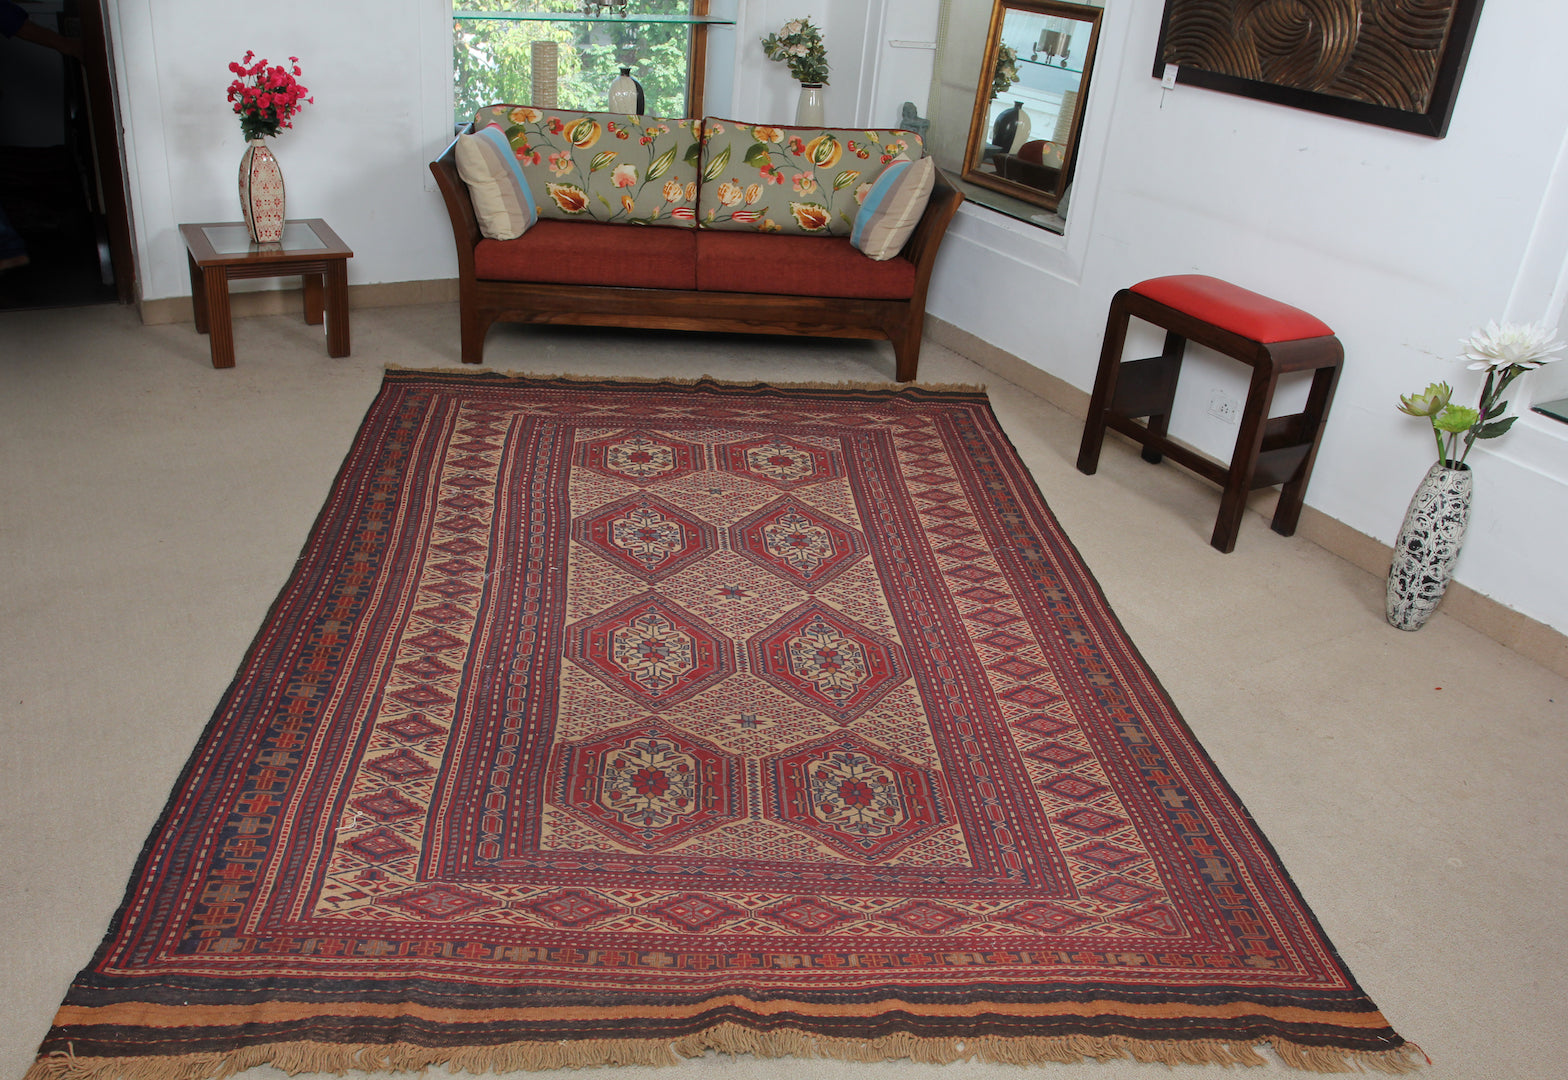 An almost 7 by 10 feet balochi wool kilim. Colours include mainly brick, orange and a light rust.